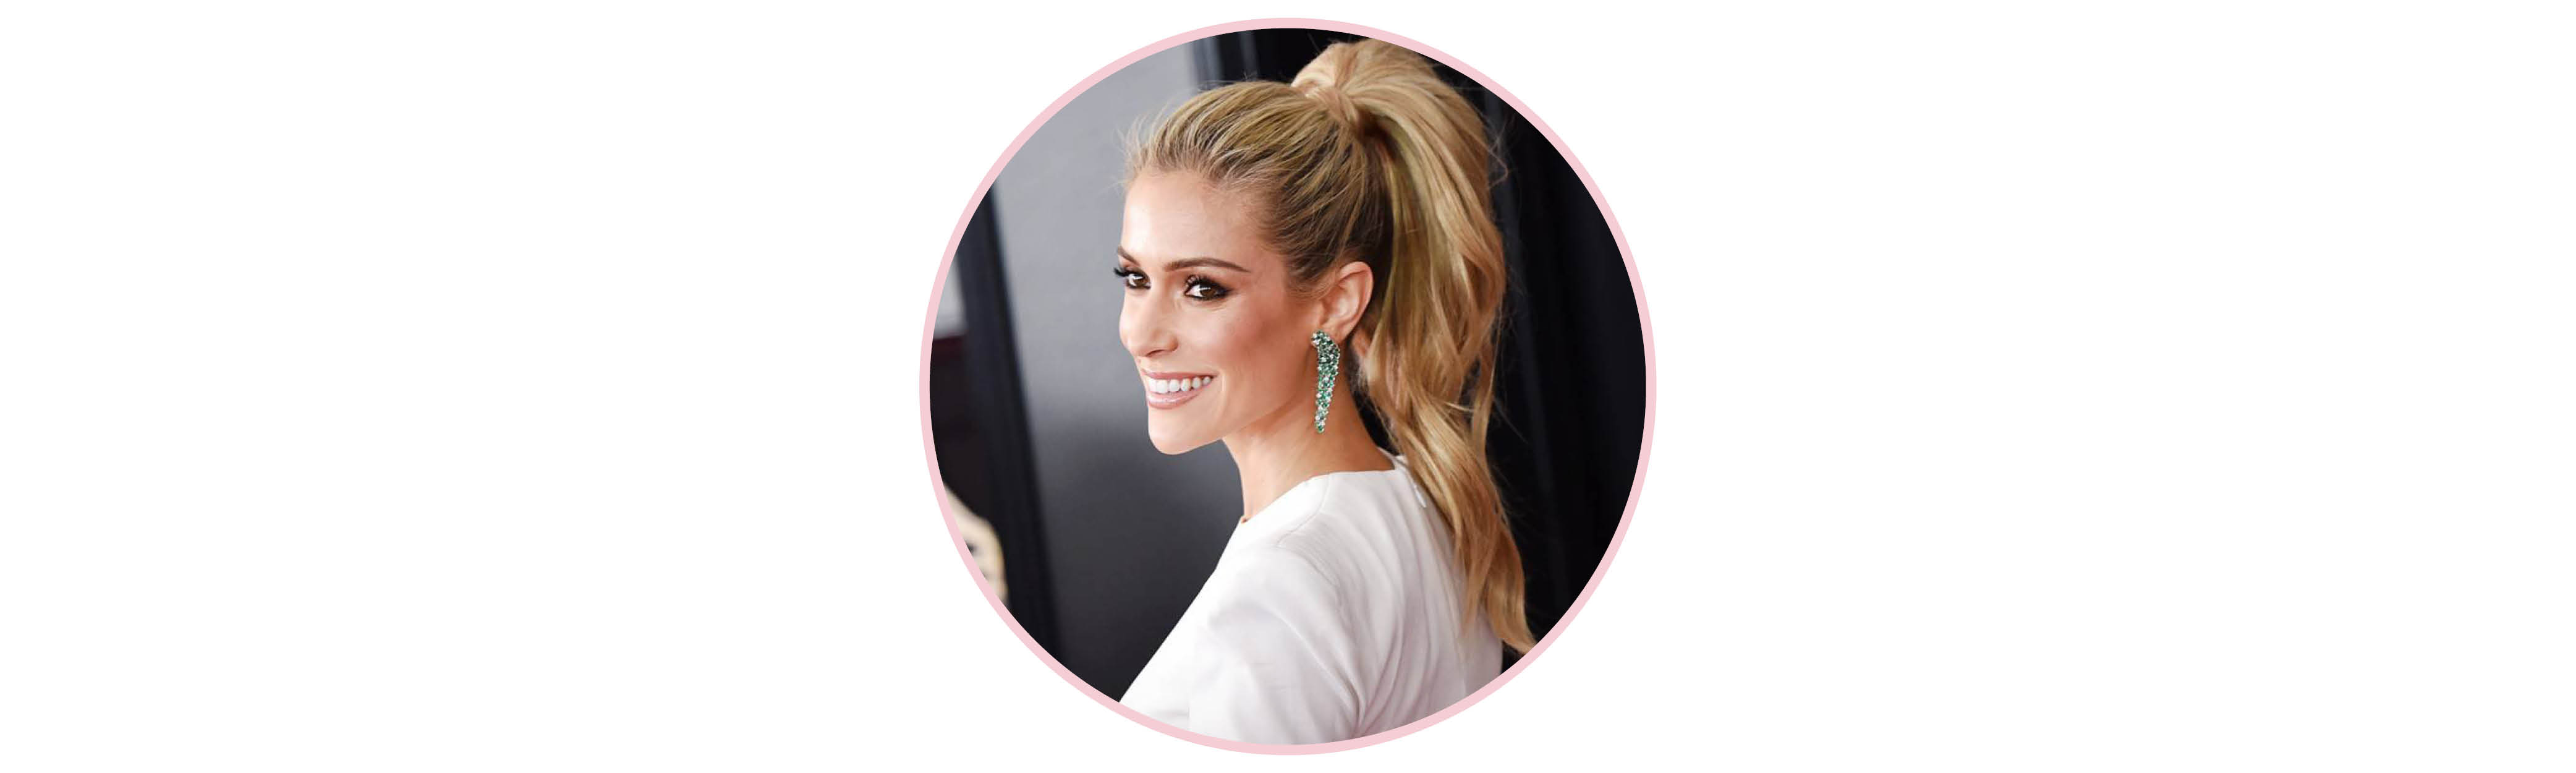 MissFQ-How-To-Dramatic-Ponytail-Phoebe-Silver-Bullet_1000x300